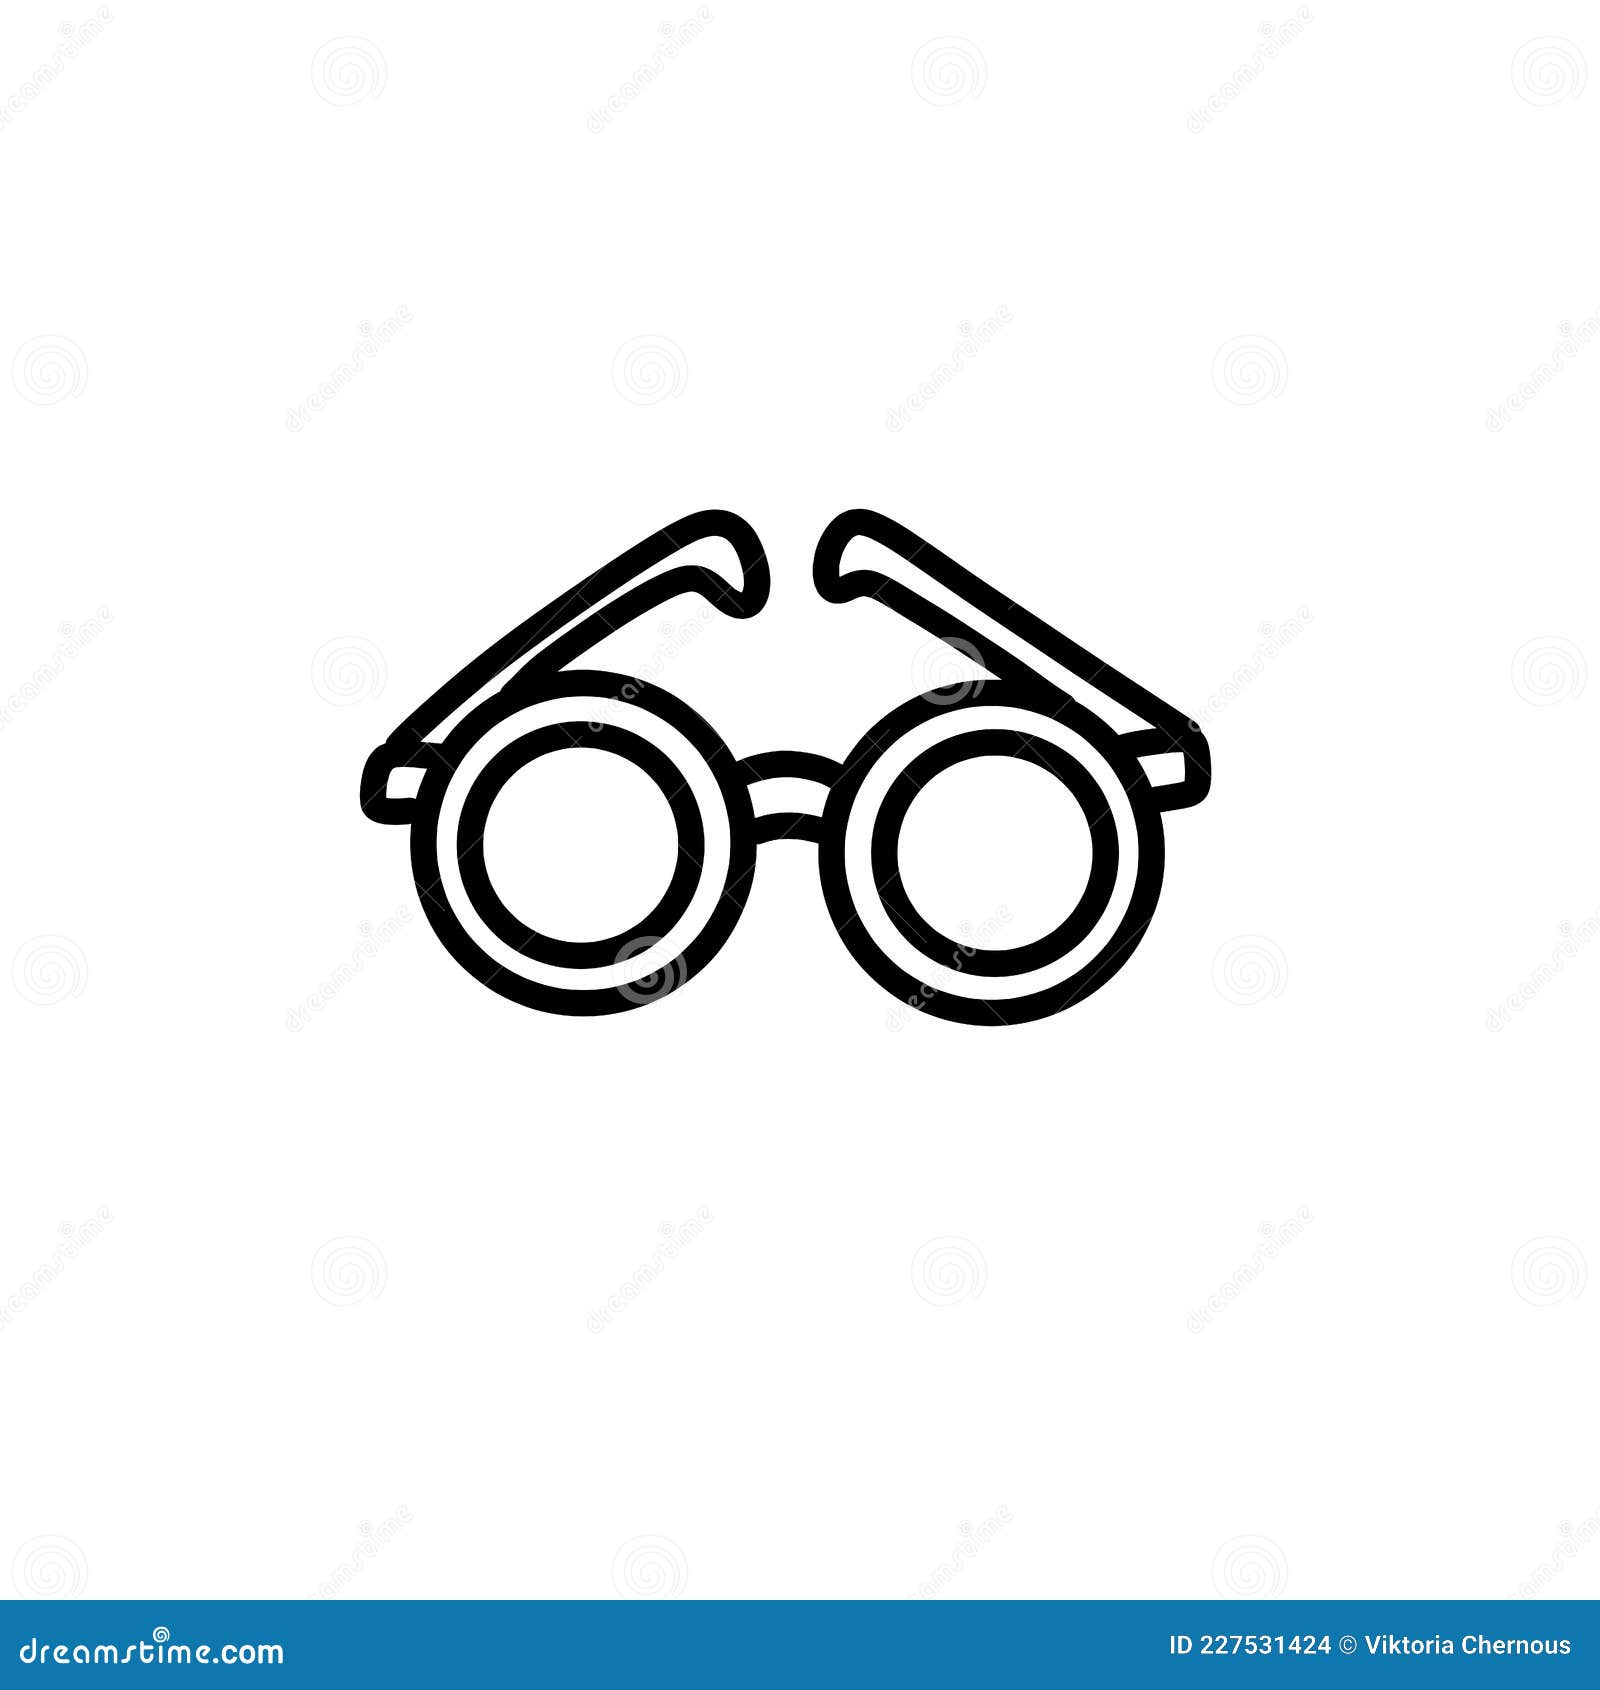 Eyeglasses Doodle Element Hand Drawn Glasses Simple Vector Sketch Illustration Isolated On A